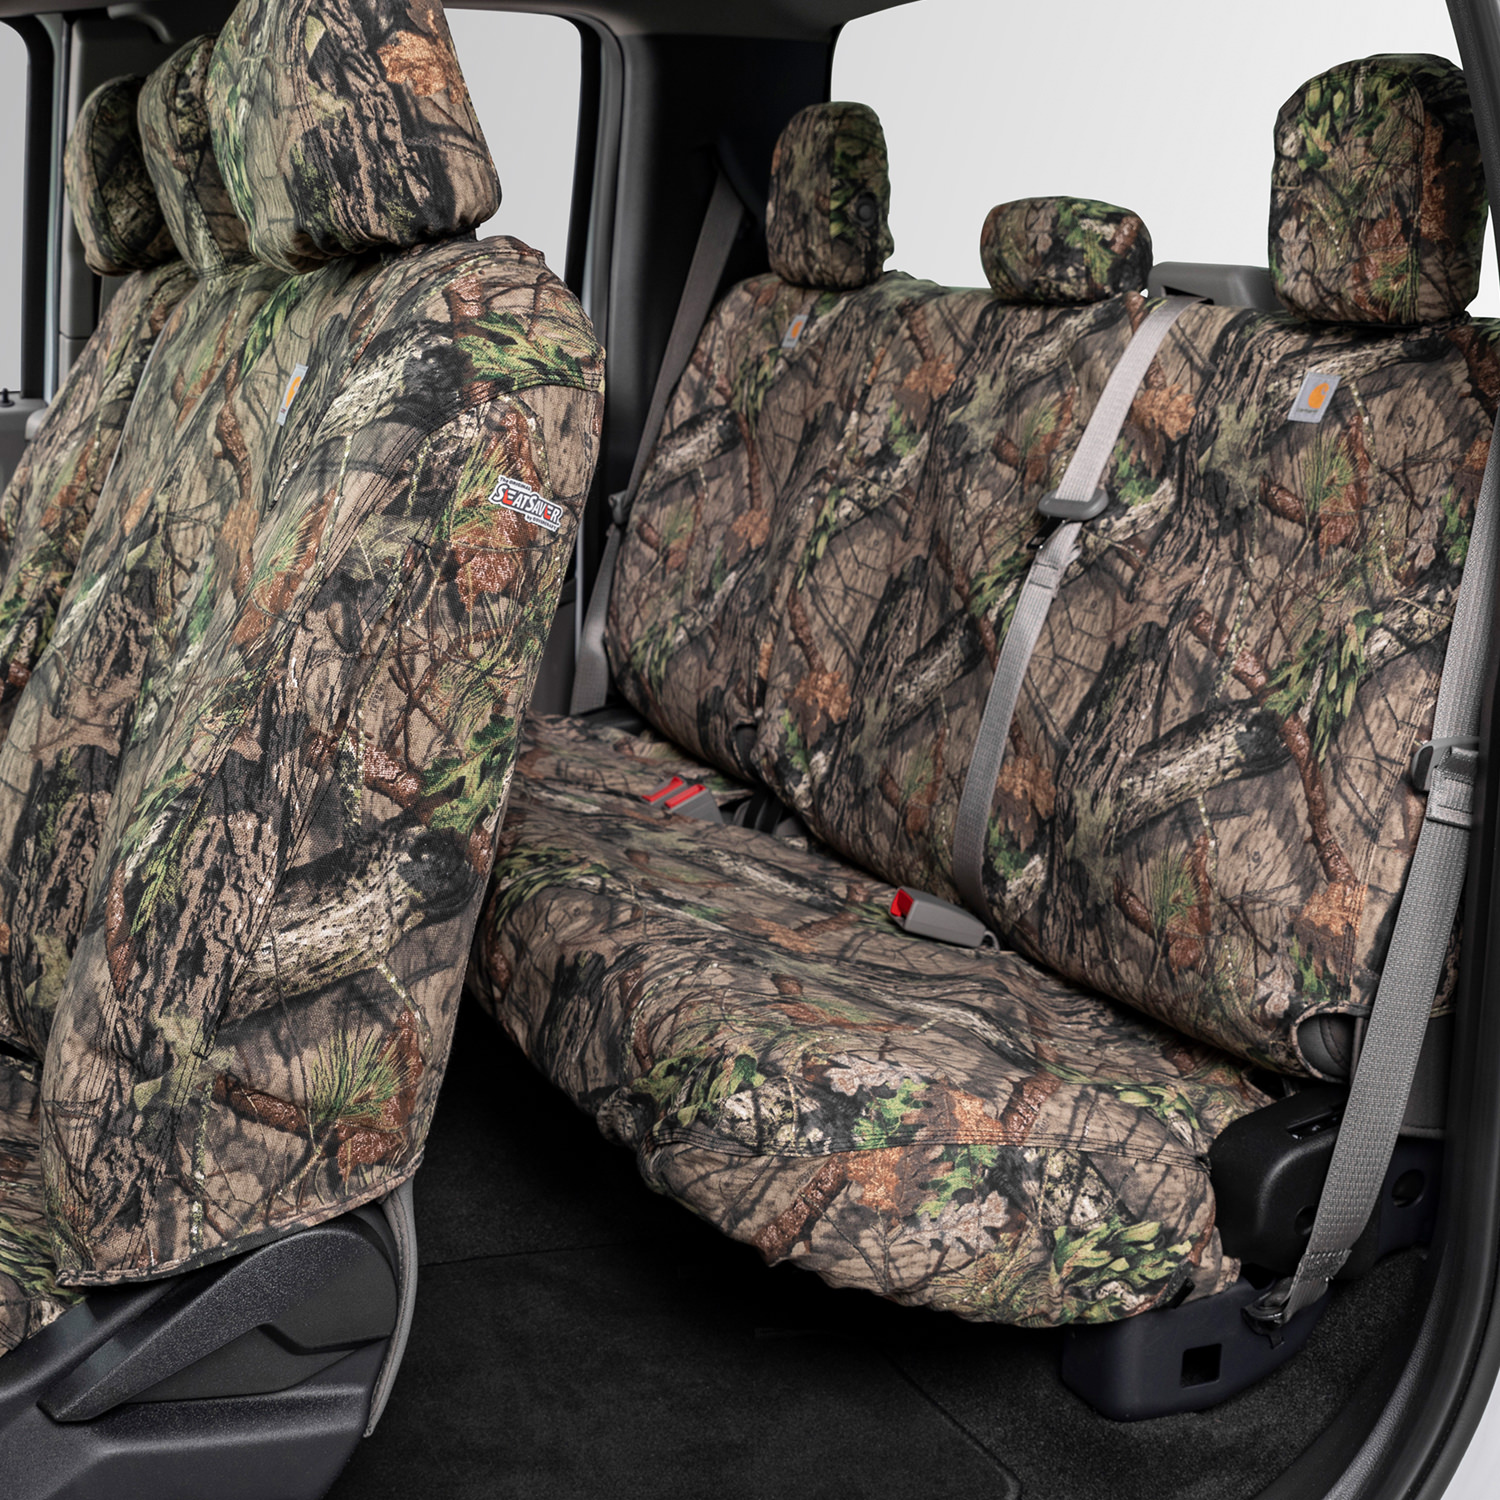 Our Mossy Oak&reg; Seat Covers are the perfect blend of rugged Carhartt&reg; Duck Weave Fabric paired with the worlds most recognized camo in Mossy Oak&reg; Break Up Country&trade;. If you love the outdoors this is the Seat Cover for you. Made highly water-resistant with Rain Defender&reg; durable water repellent to protect your seats from accidental spills or soggy clothes from hunting outdoors.